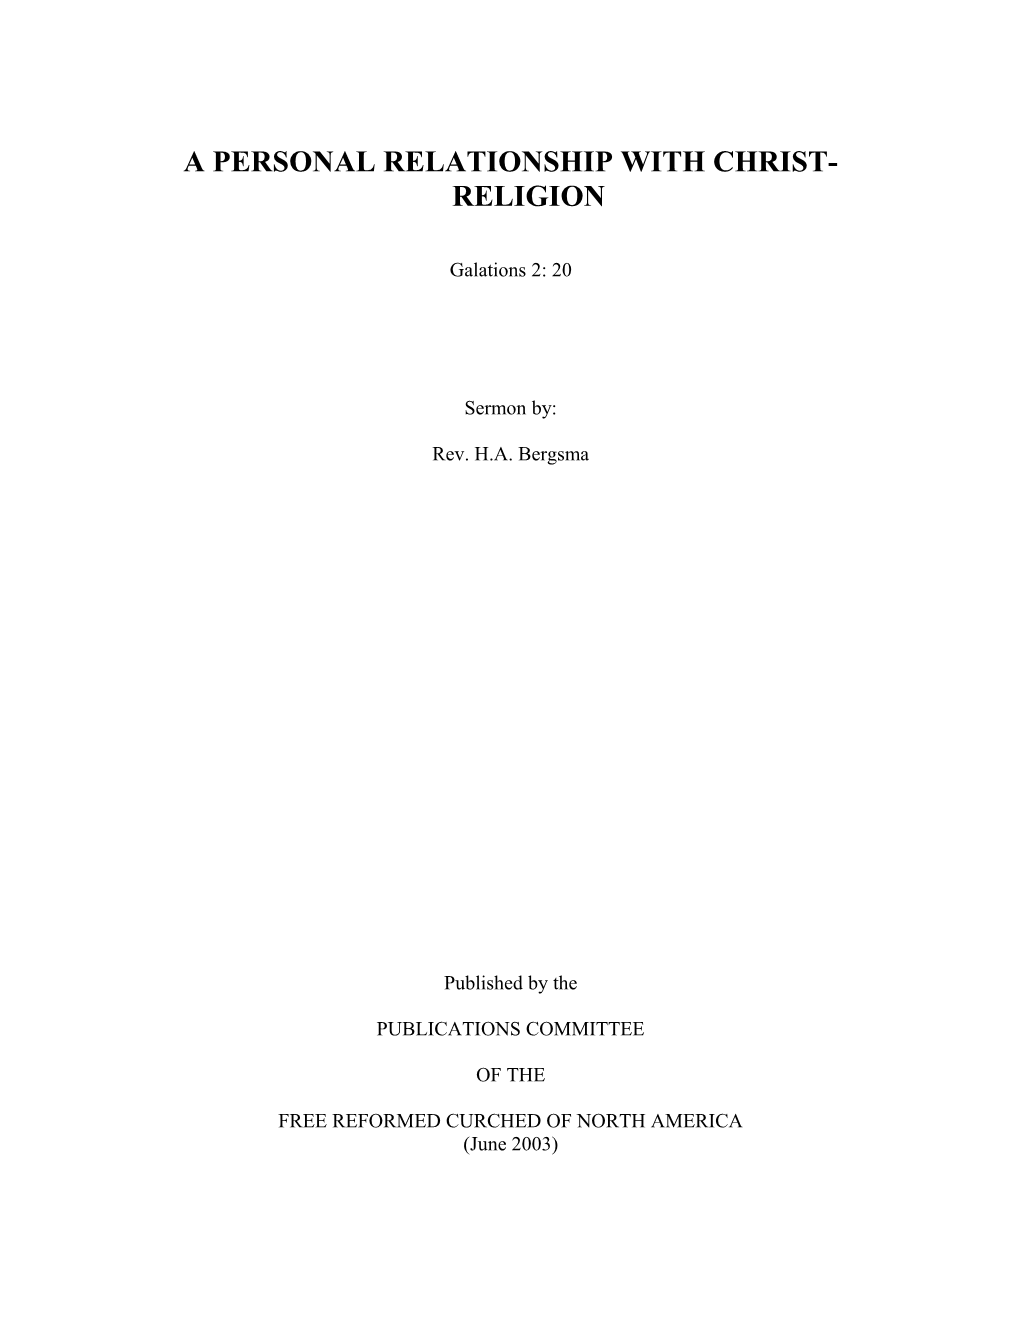 A Personal Relationship with Christ-Religion